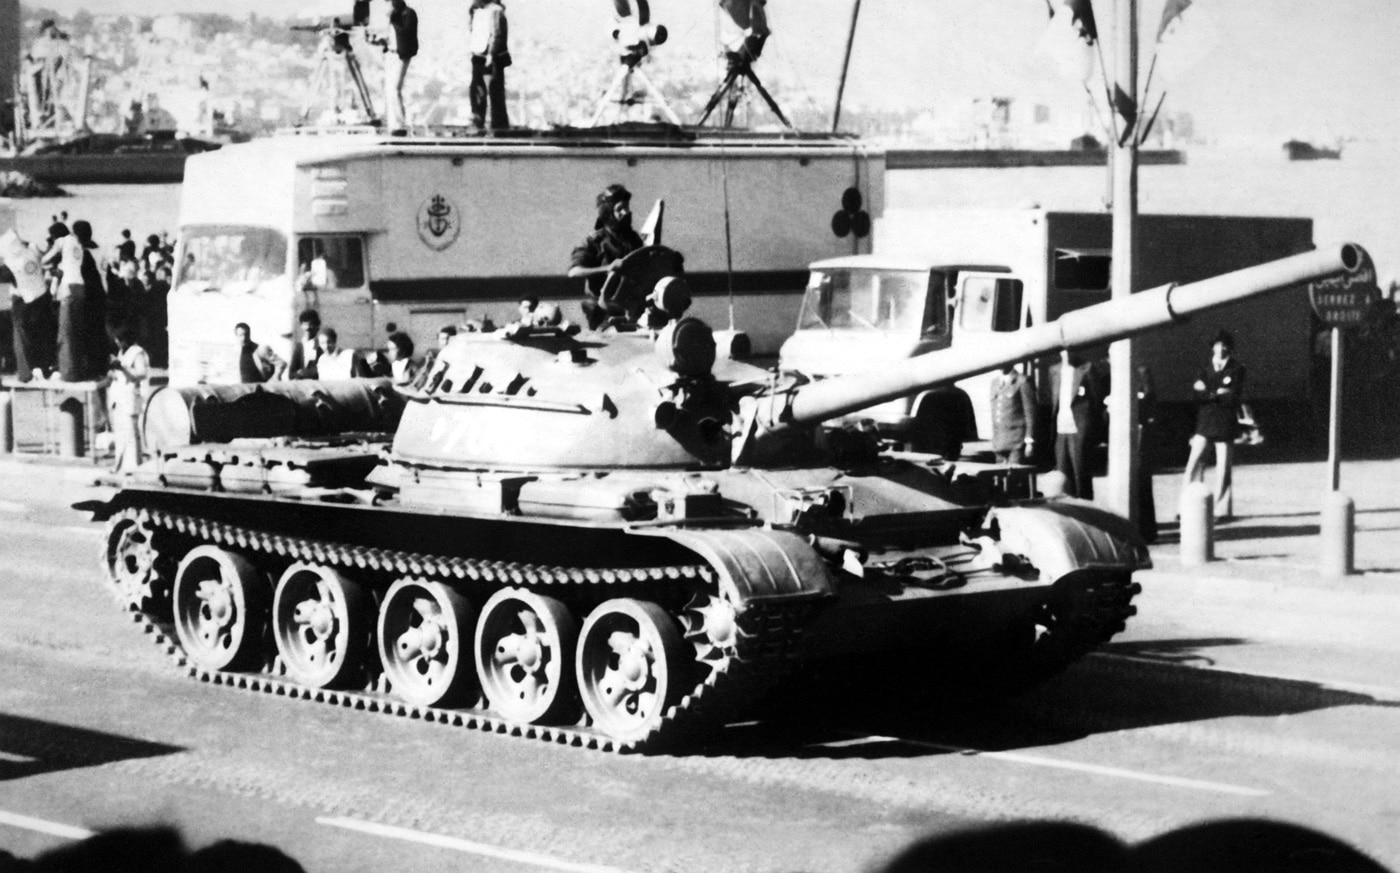 Shown in this photo is a image of a T-62 tank in Afghanistan from the early 1980s. Even though the tanks are extremely old, the Russians have pressed them back into service due to the staggering losses of armor suffered by Russian forces. The T-62 is currently in use in Ukraine even though it is a bit of a dog against modern anti-tank weapons.  Manufacturing problems with the Armata have prevent any substantial number of them from being used in the current war. The Armata was actively used in Syria, but even there they are said to have suffered losses.